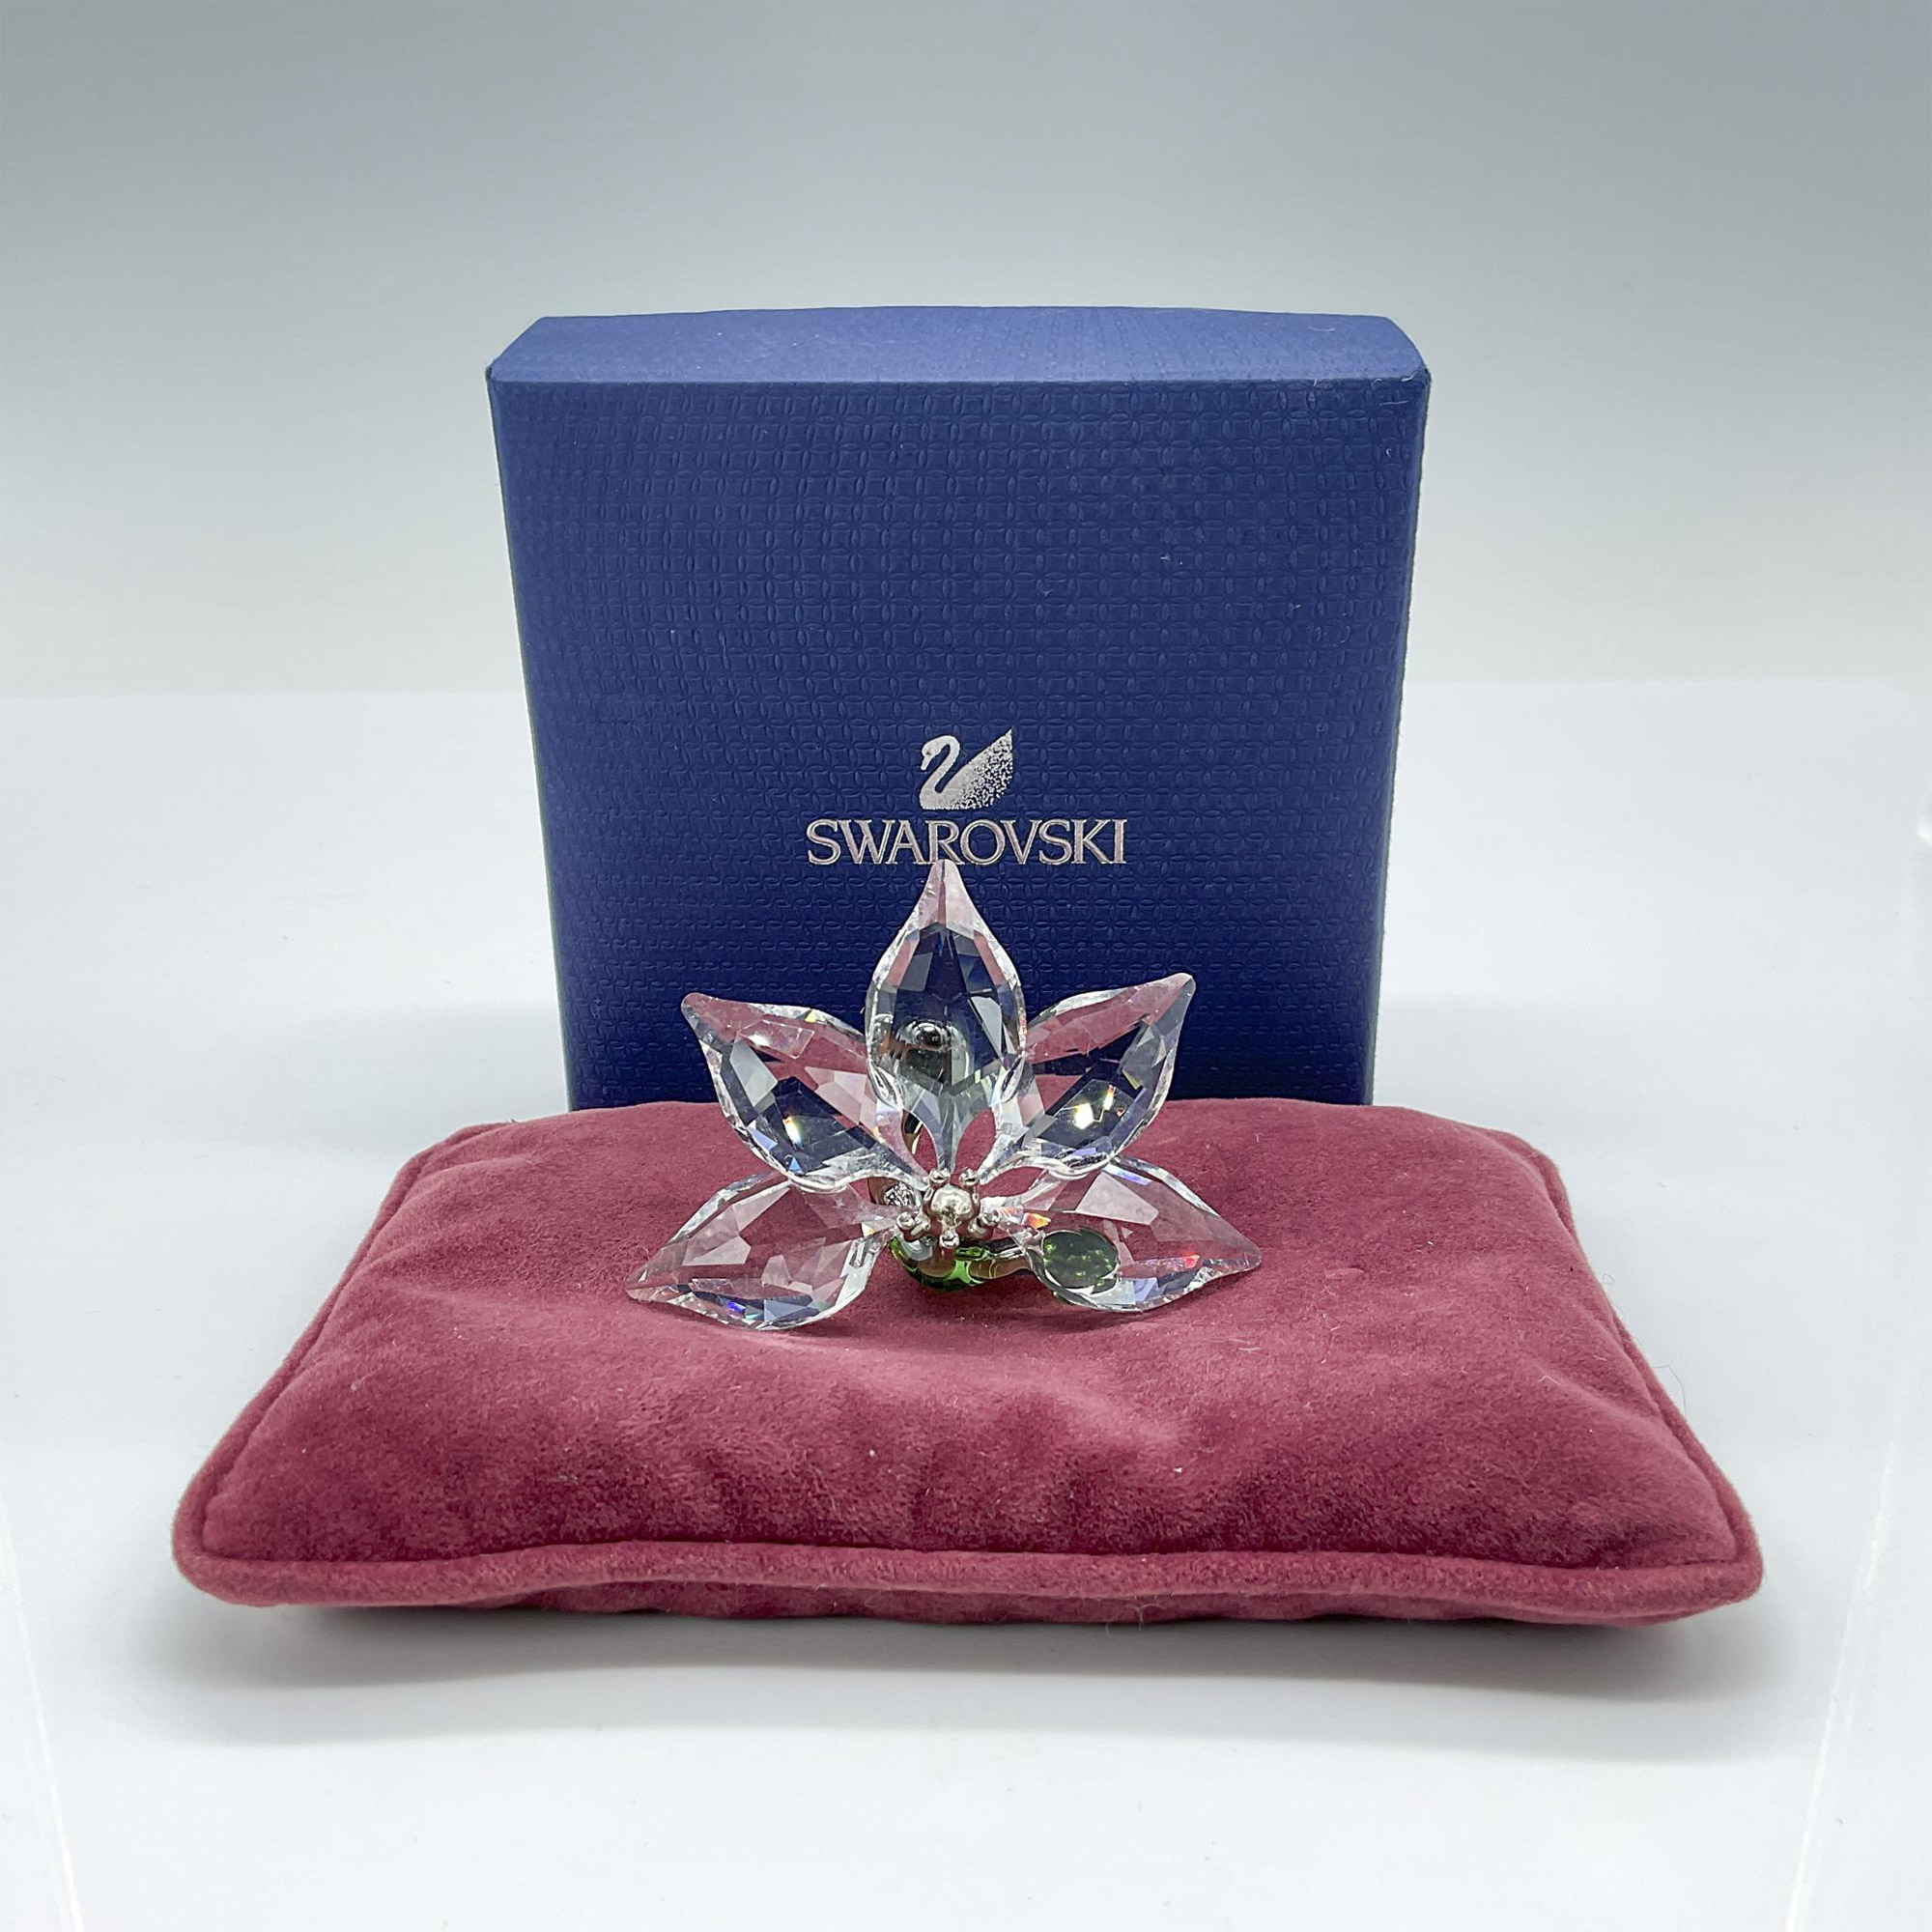 Swarovski Crystal Figurine, Orchid with Pillow - Image 4 of 4